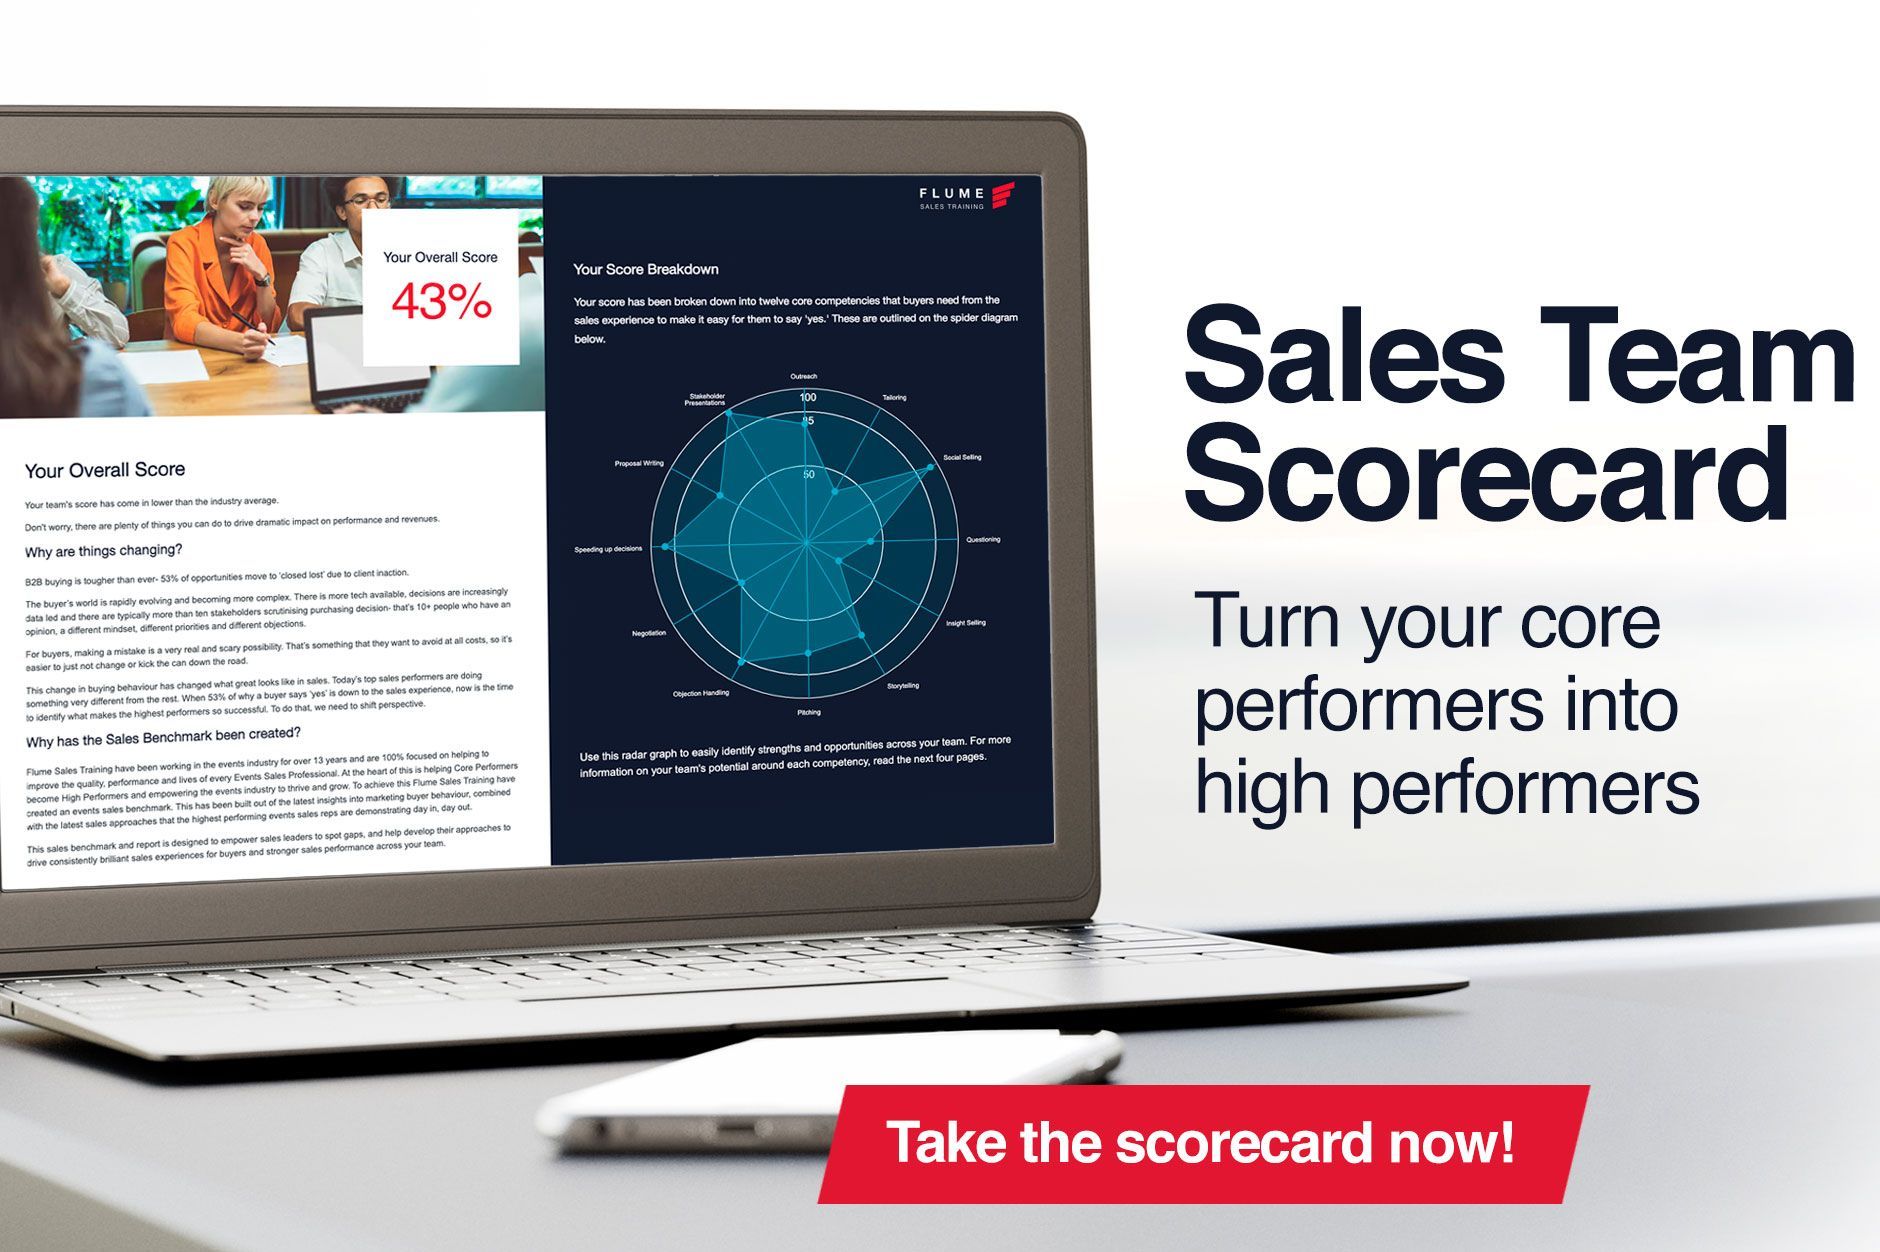 Turning average sales teams into top performers